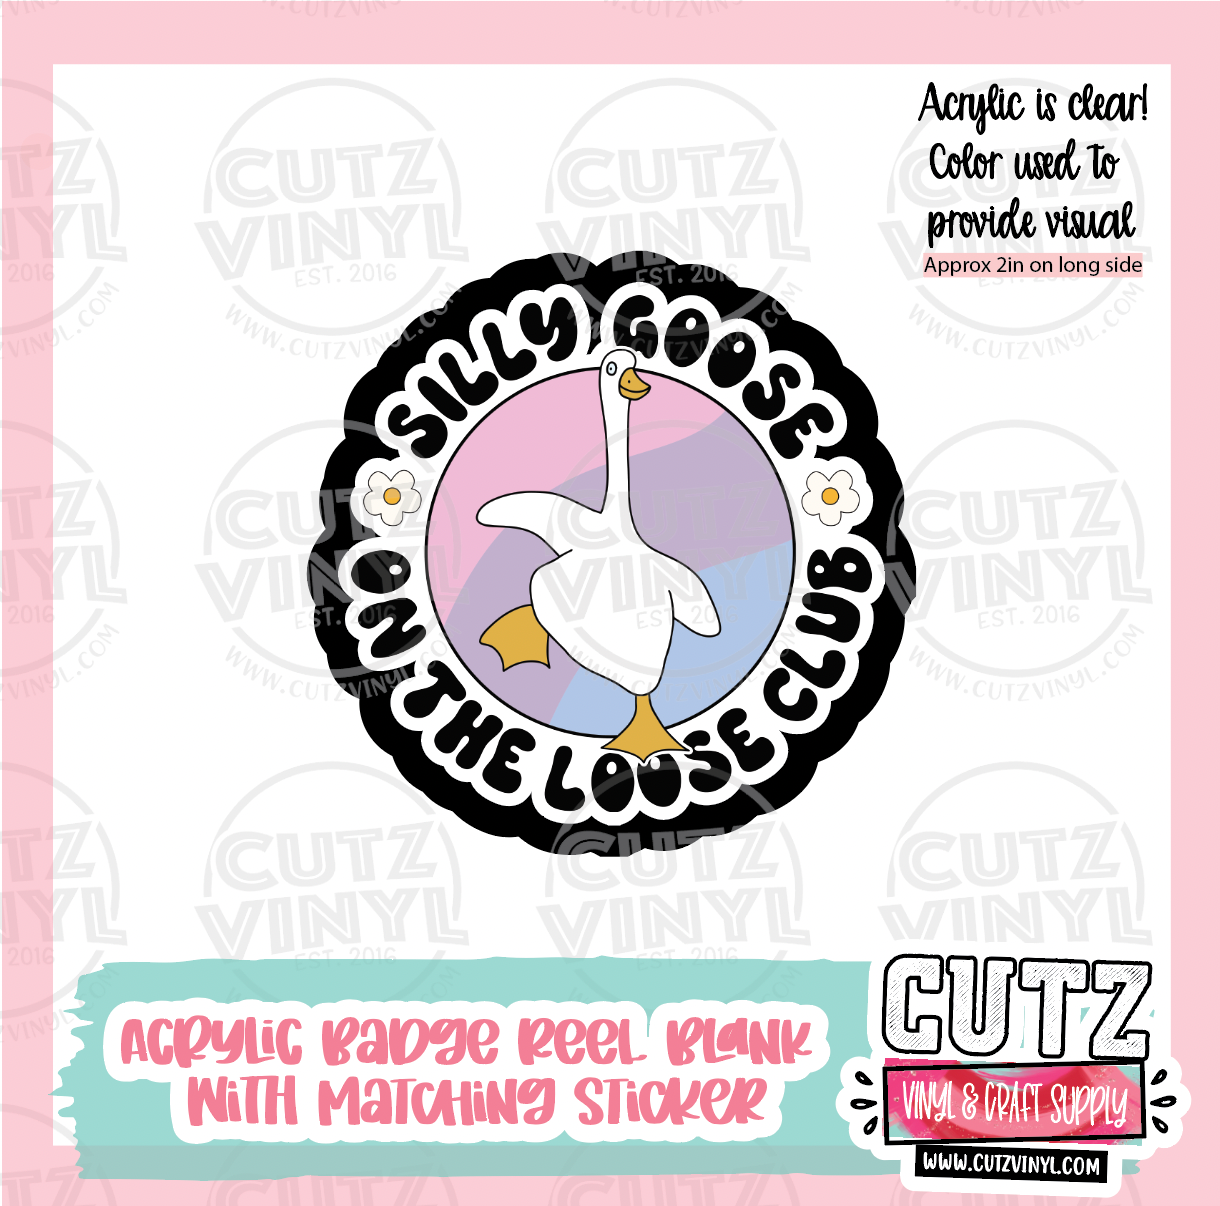 Silly Goose - Acrylic Badge Reel Blank and Matching Sticker